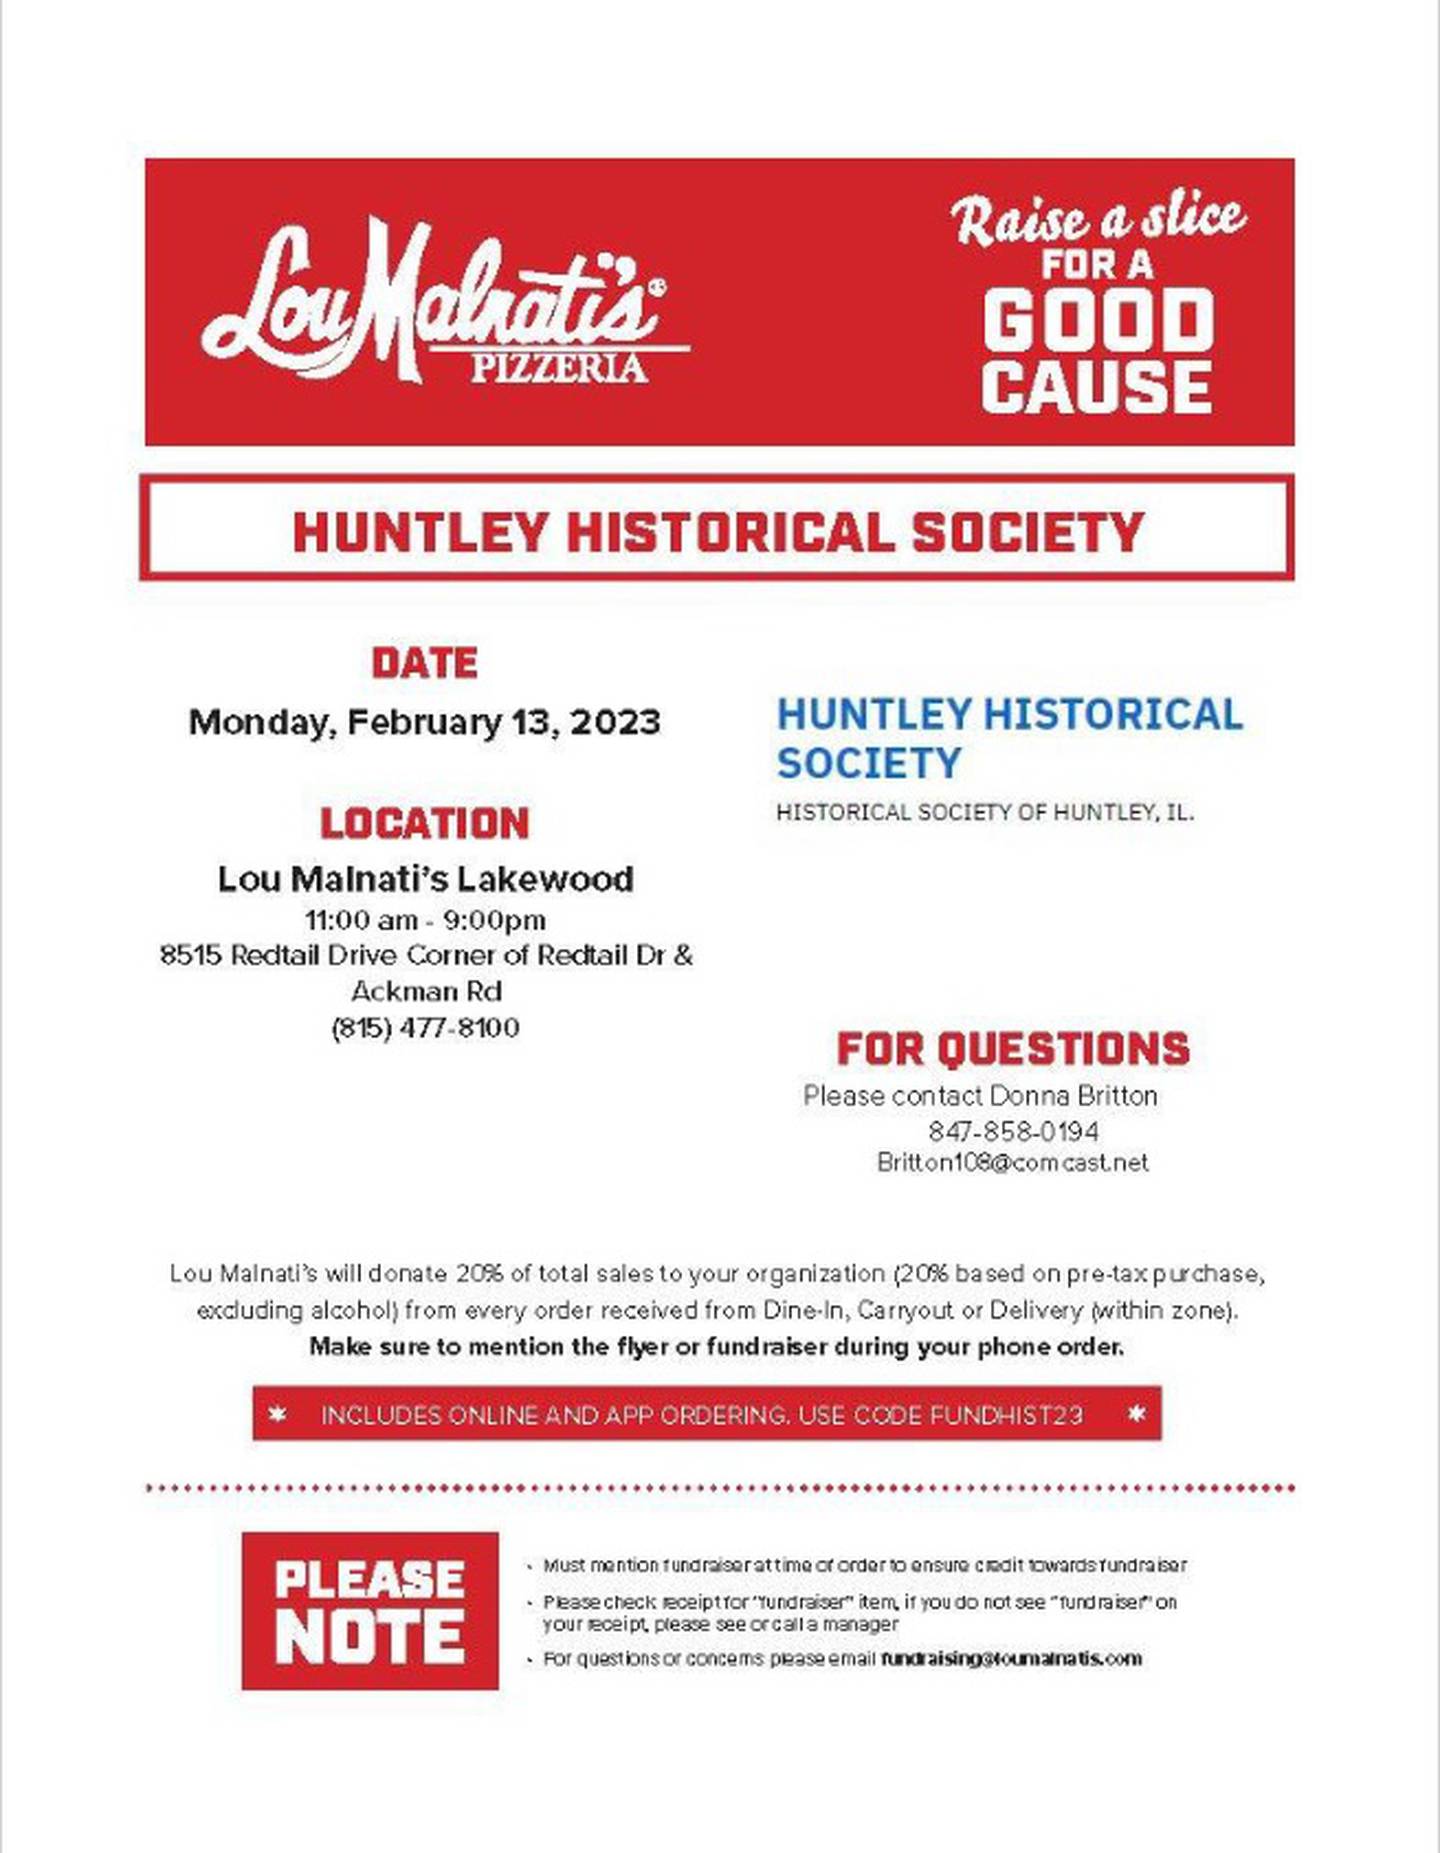 The Huntley Historical Society is asking people to present this flyer when ordering at Lou Mulnati's in Lakewood on February 13, 2023. This is because the organization provides donations to open the museum.